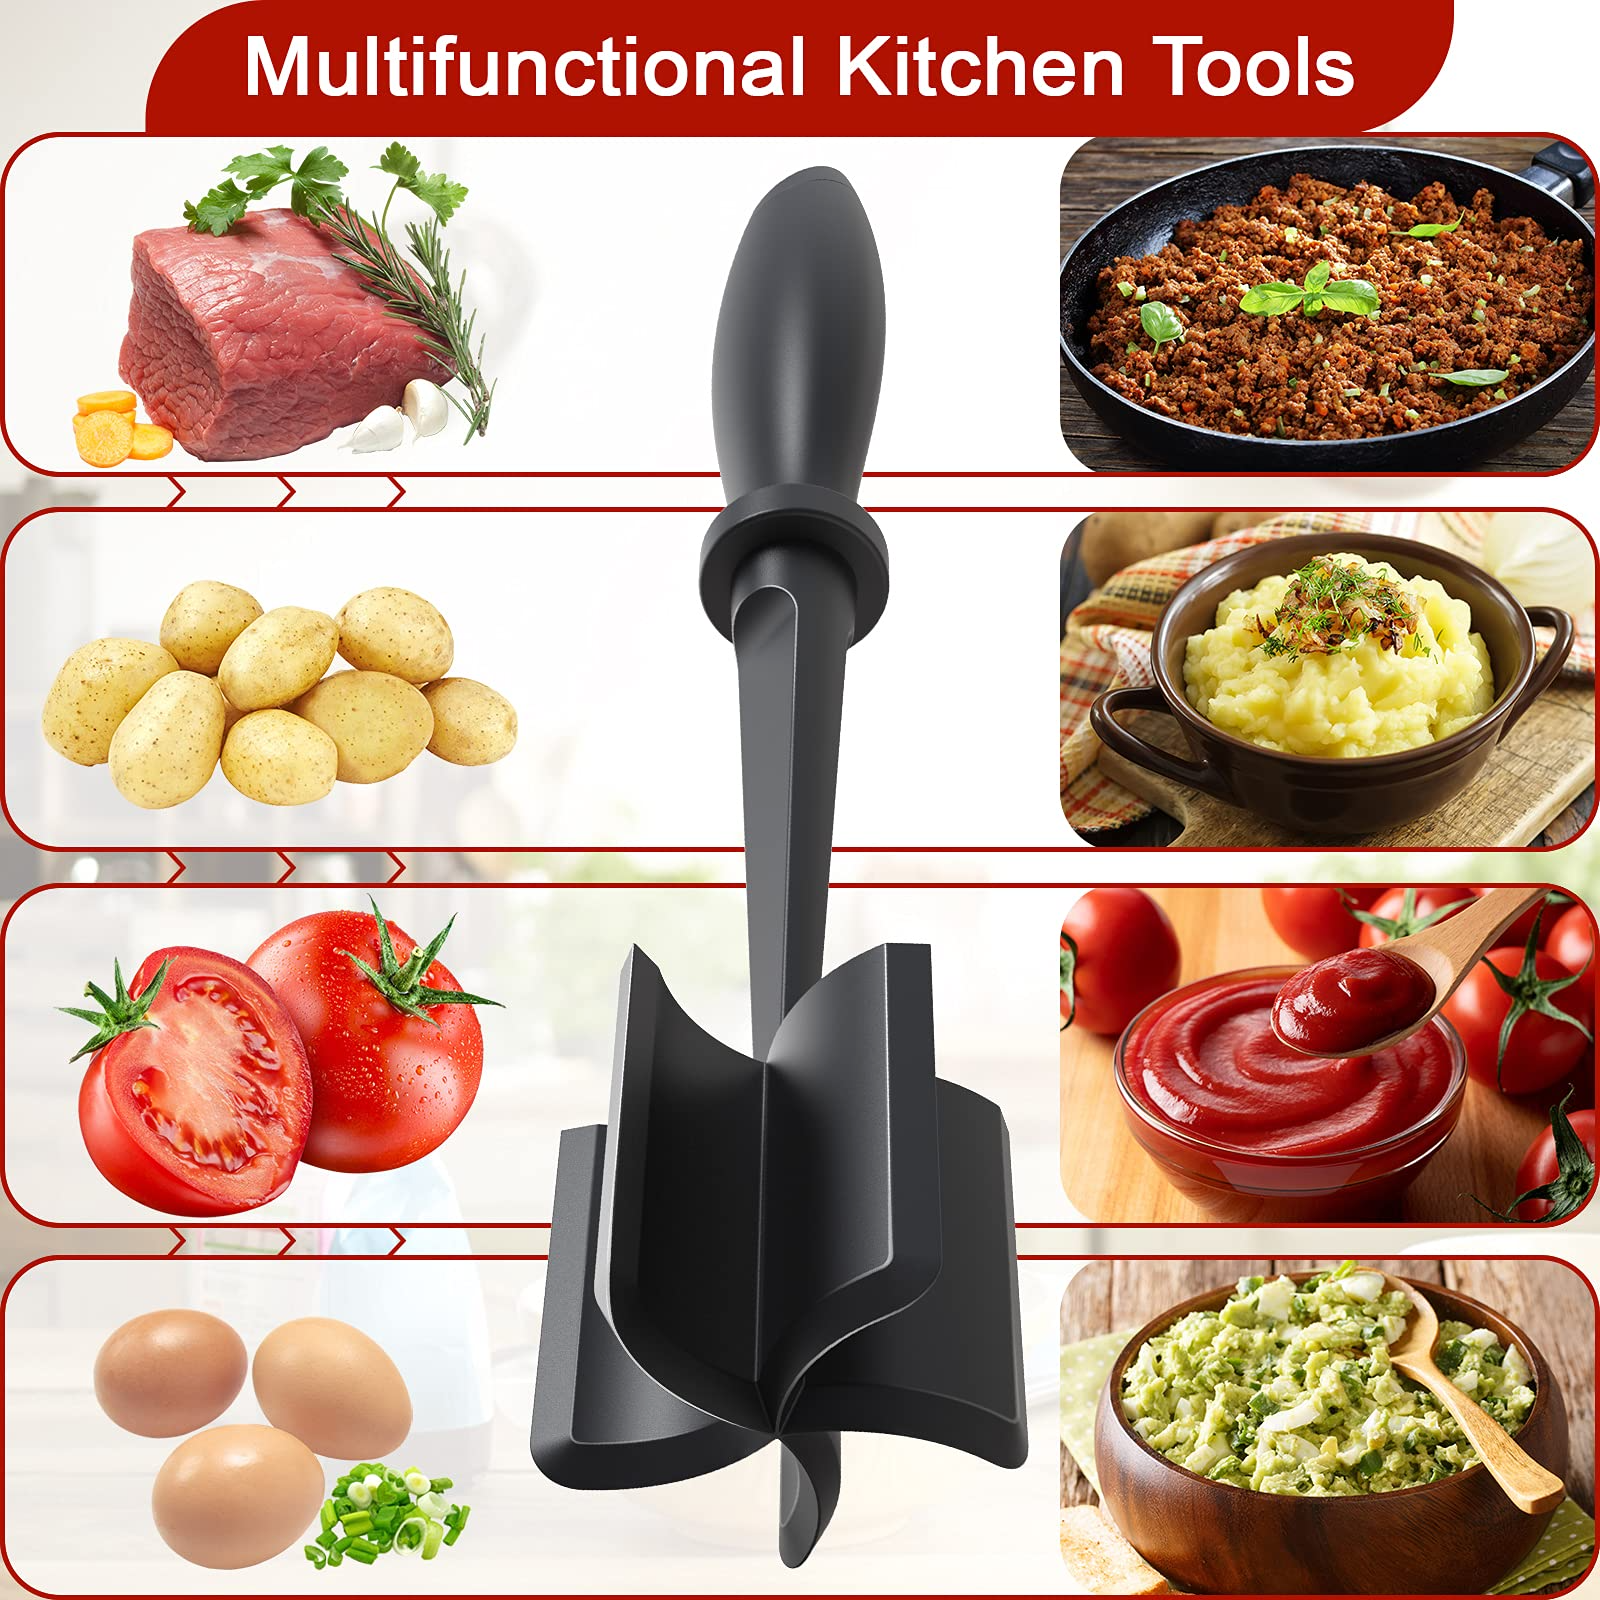 3 Reasons the Mix 'N Chop Will Be Your Favorite Kitchen Tool